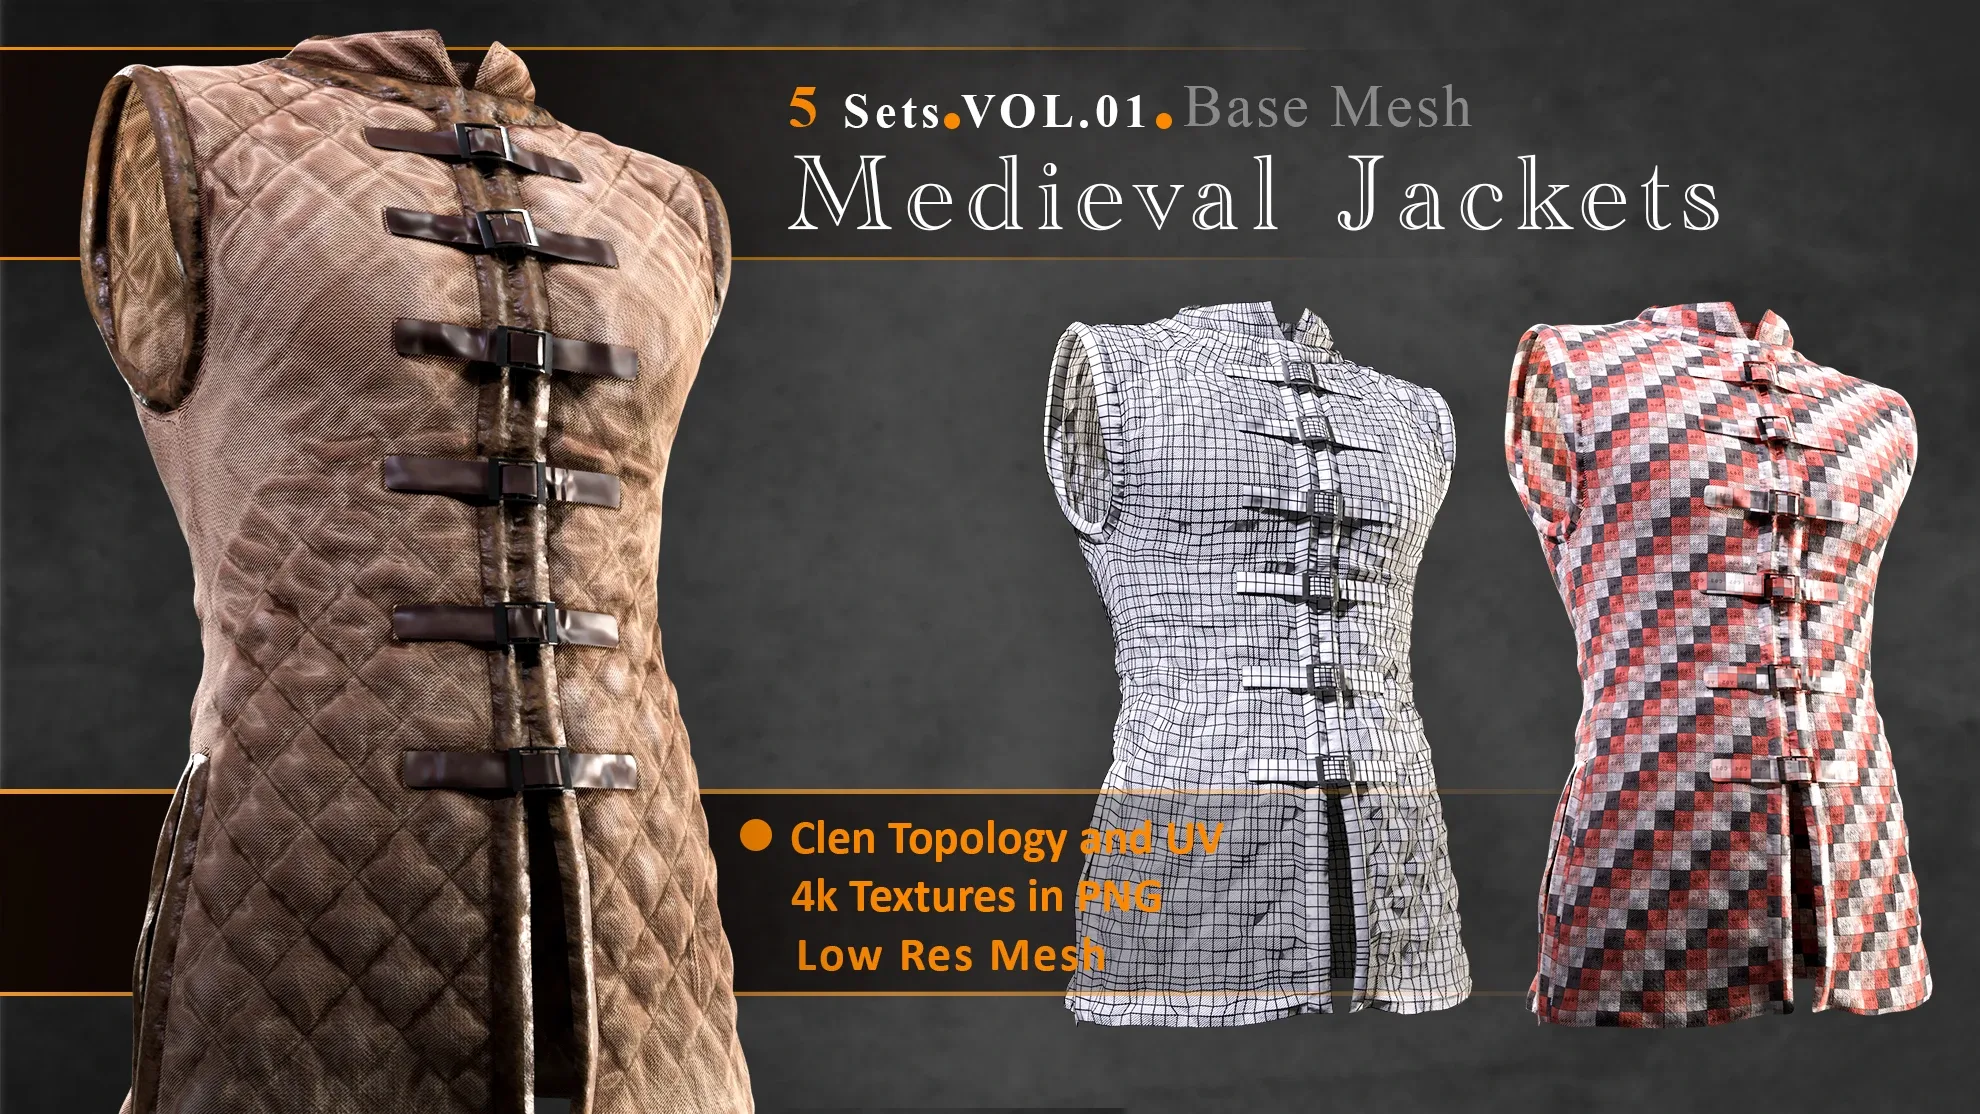 Medieval Style Jackets Base Mesh Vol 01